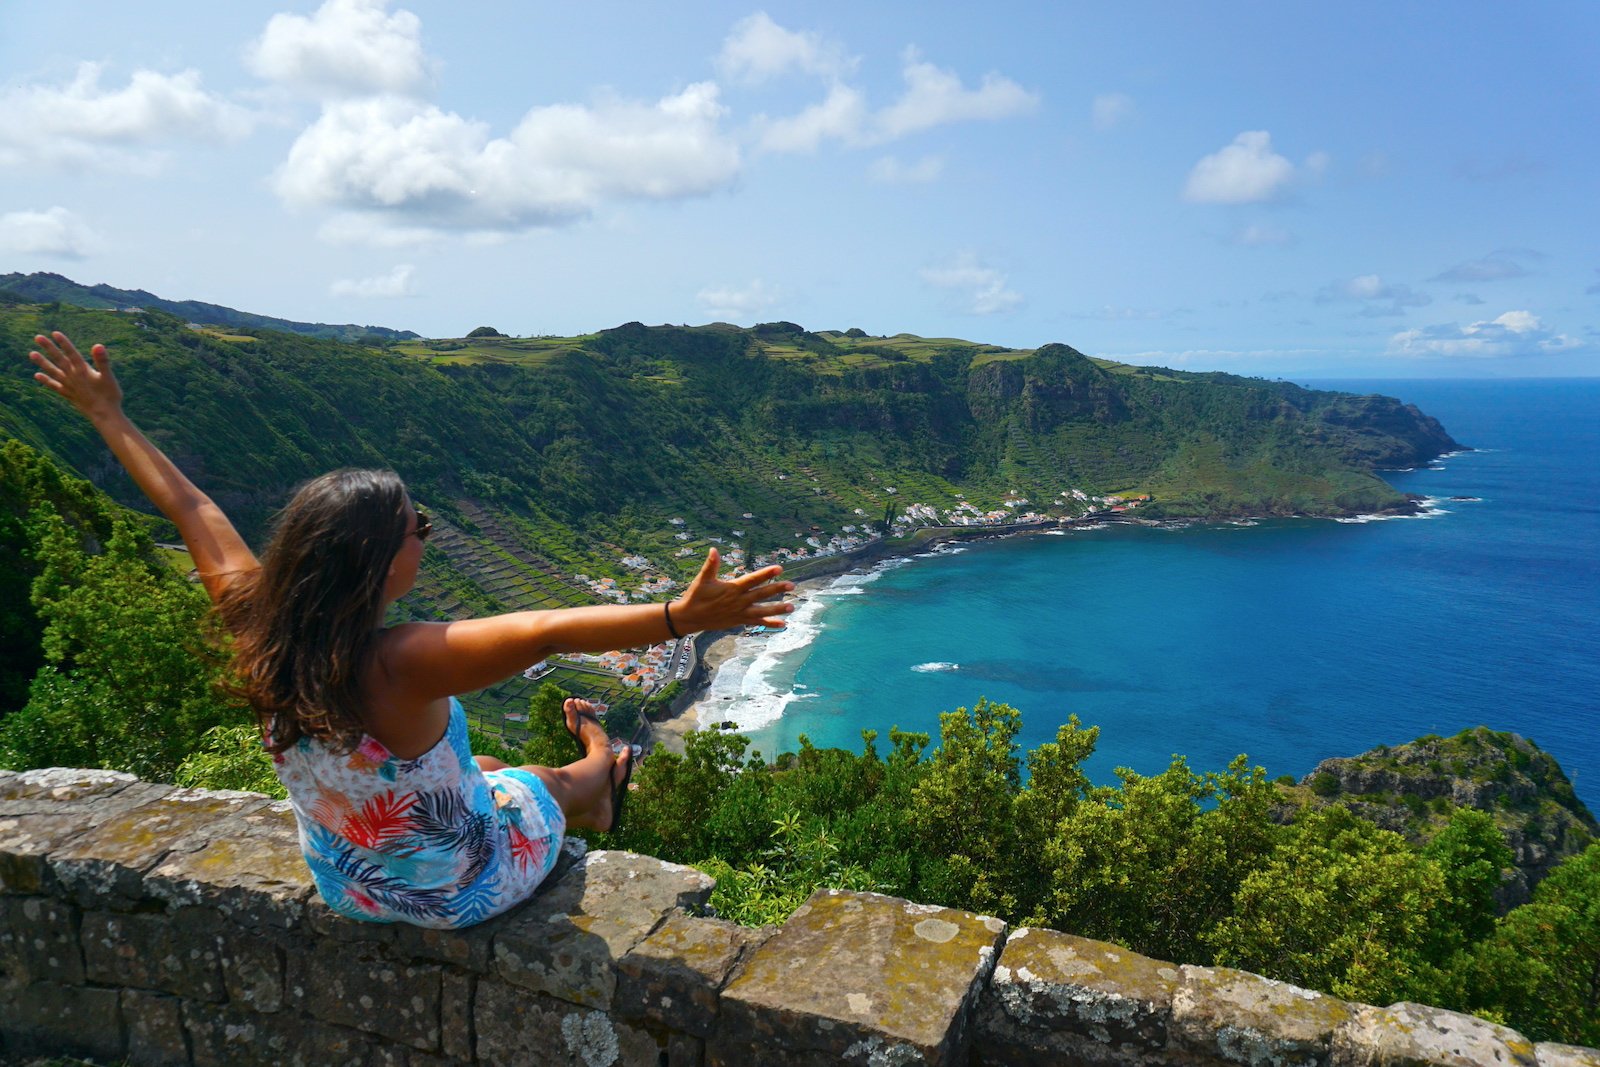 Santa Maria (Azores): a guide to visit the island [with map] on